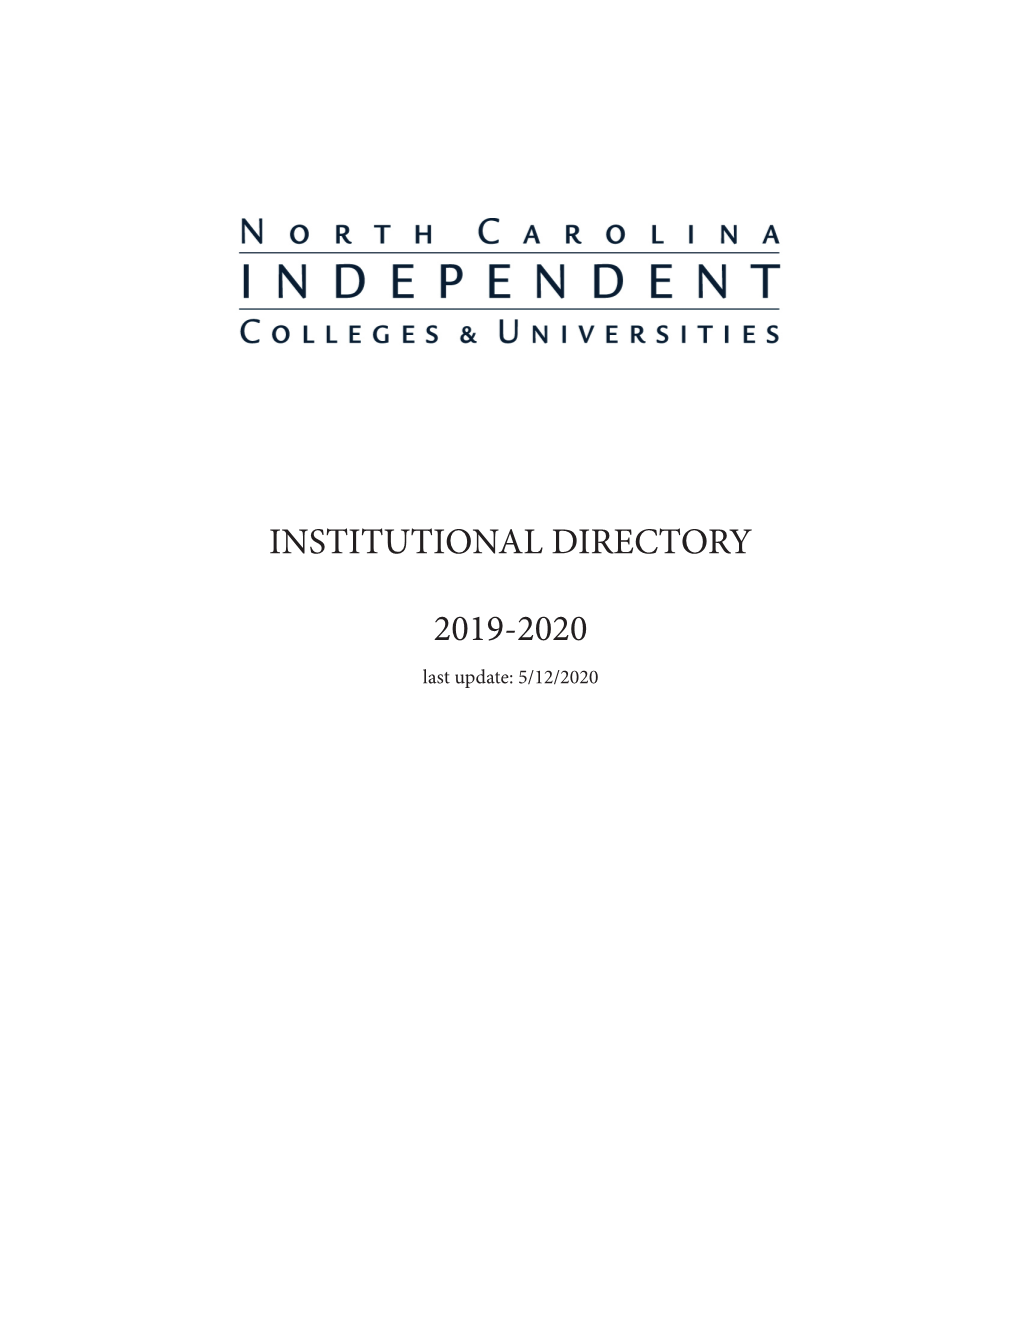 Institutional Directory 2019-2020